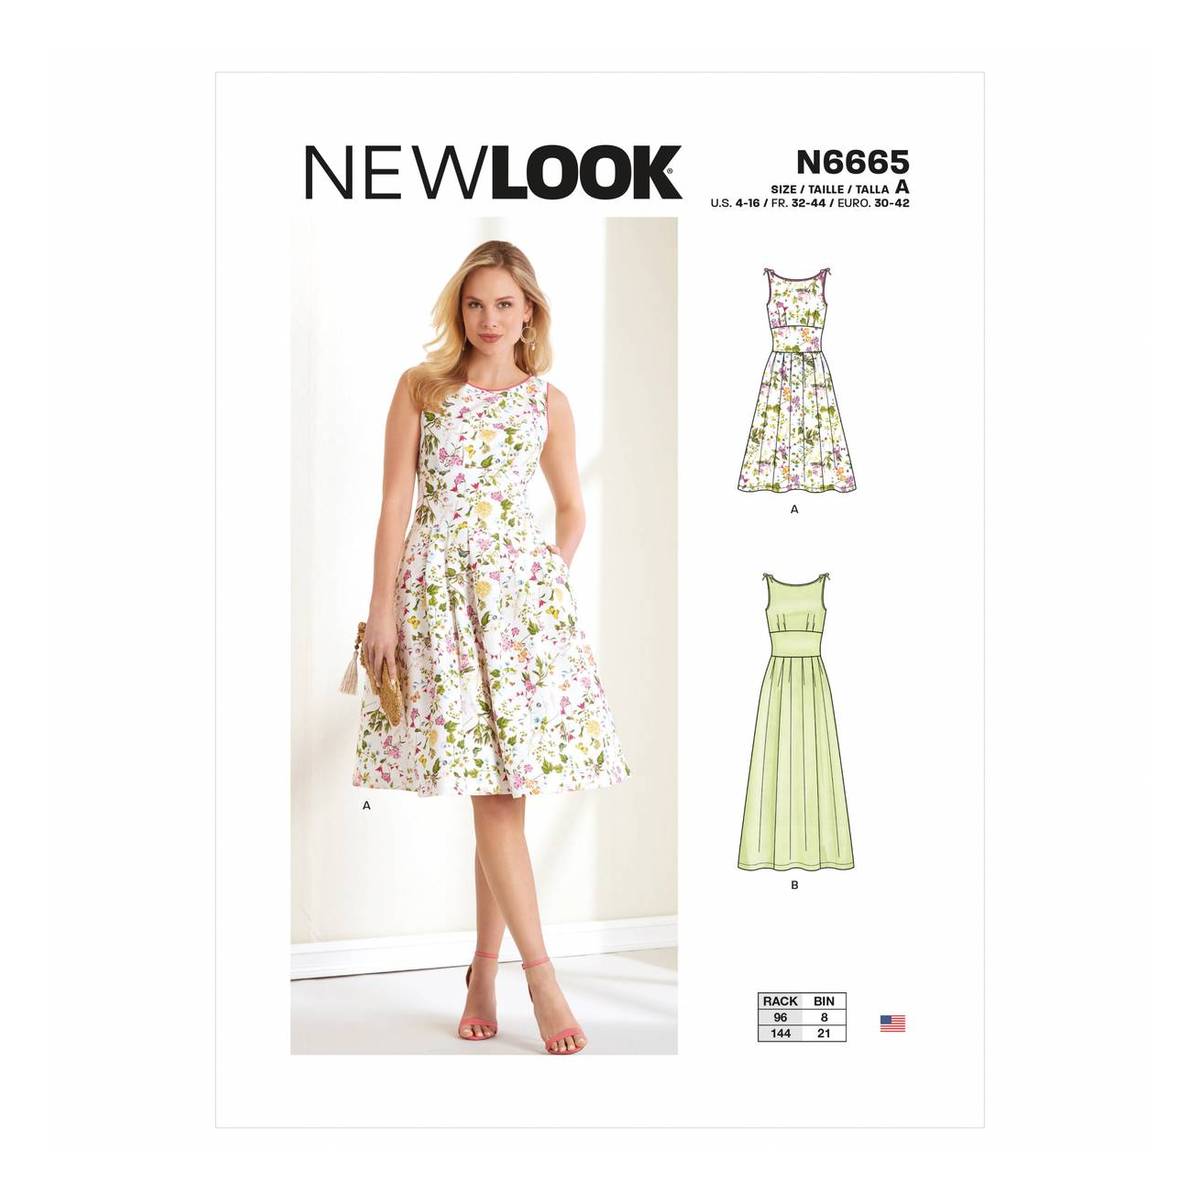 New Look Patterns Spring 2020 – Doctor T Designs